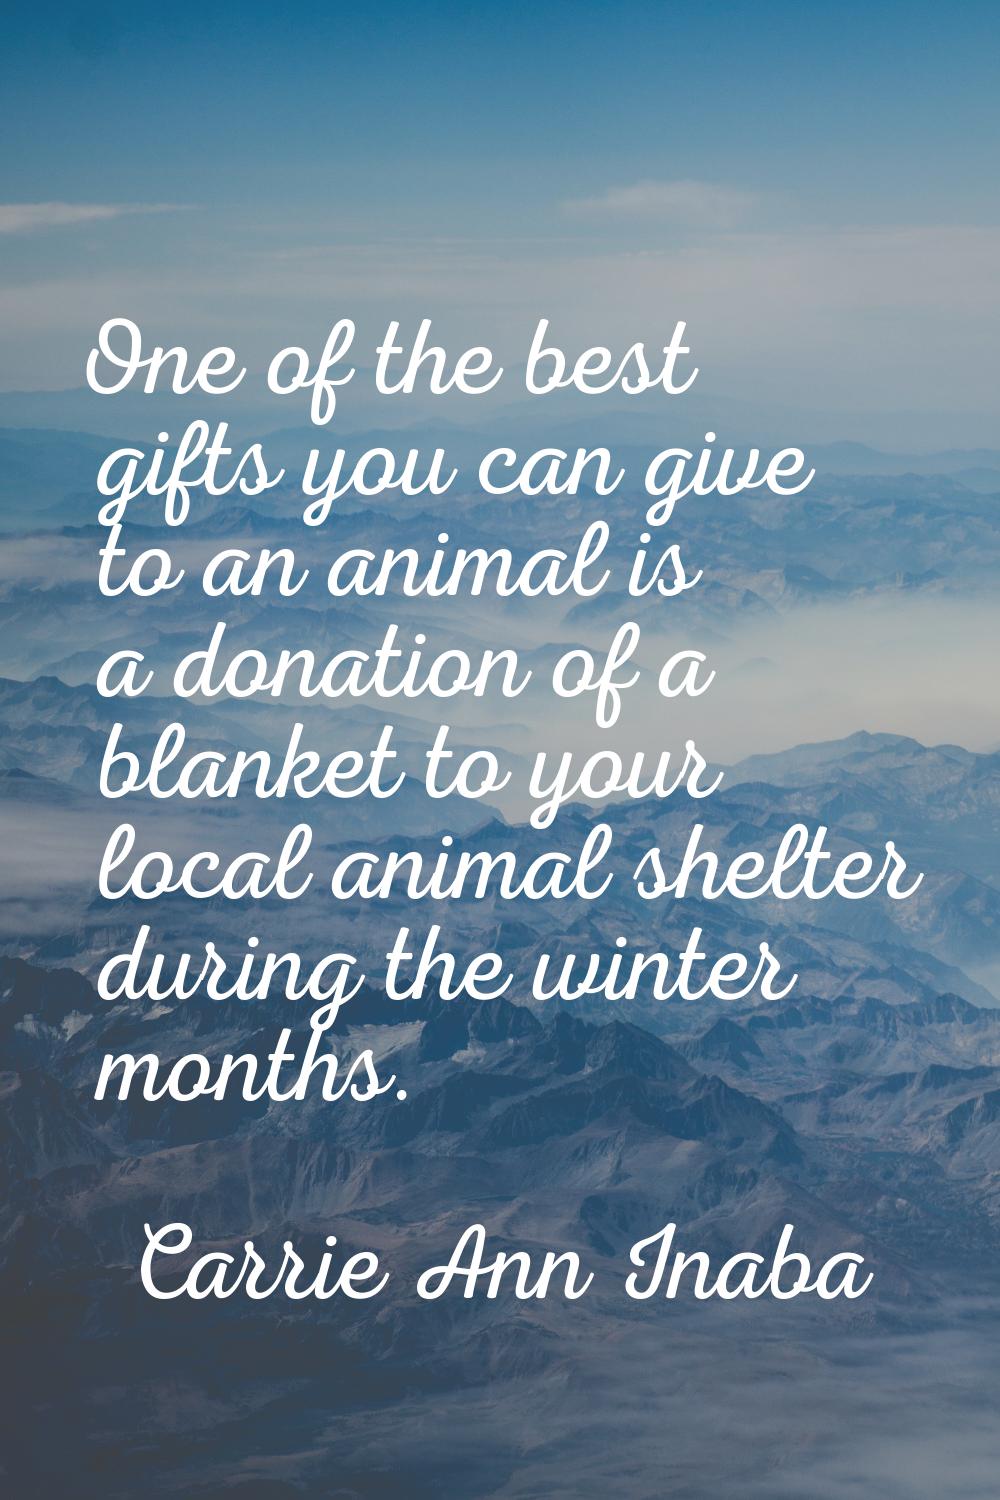 One of the best gifts you can give to an animal is a donation of a blanket to your local animal she